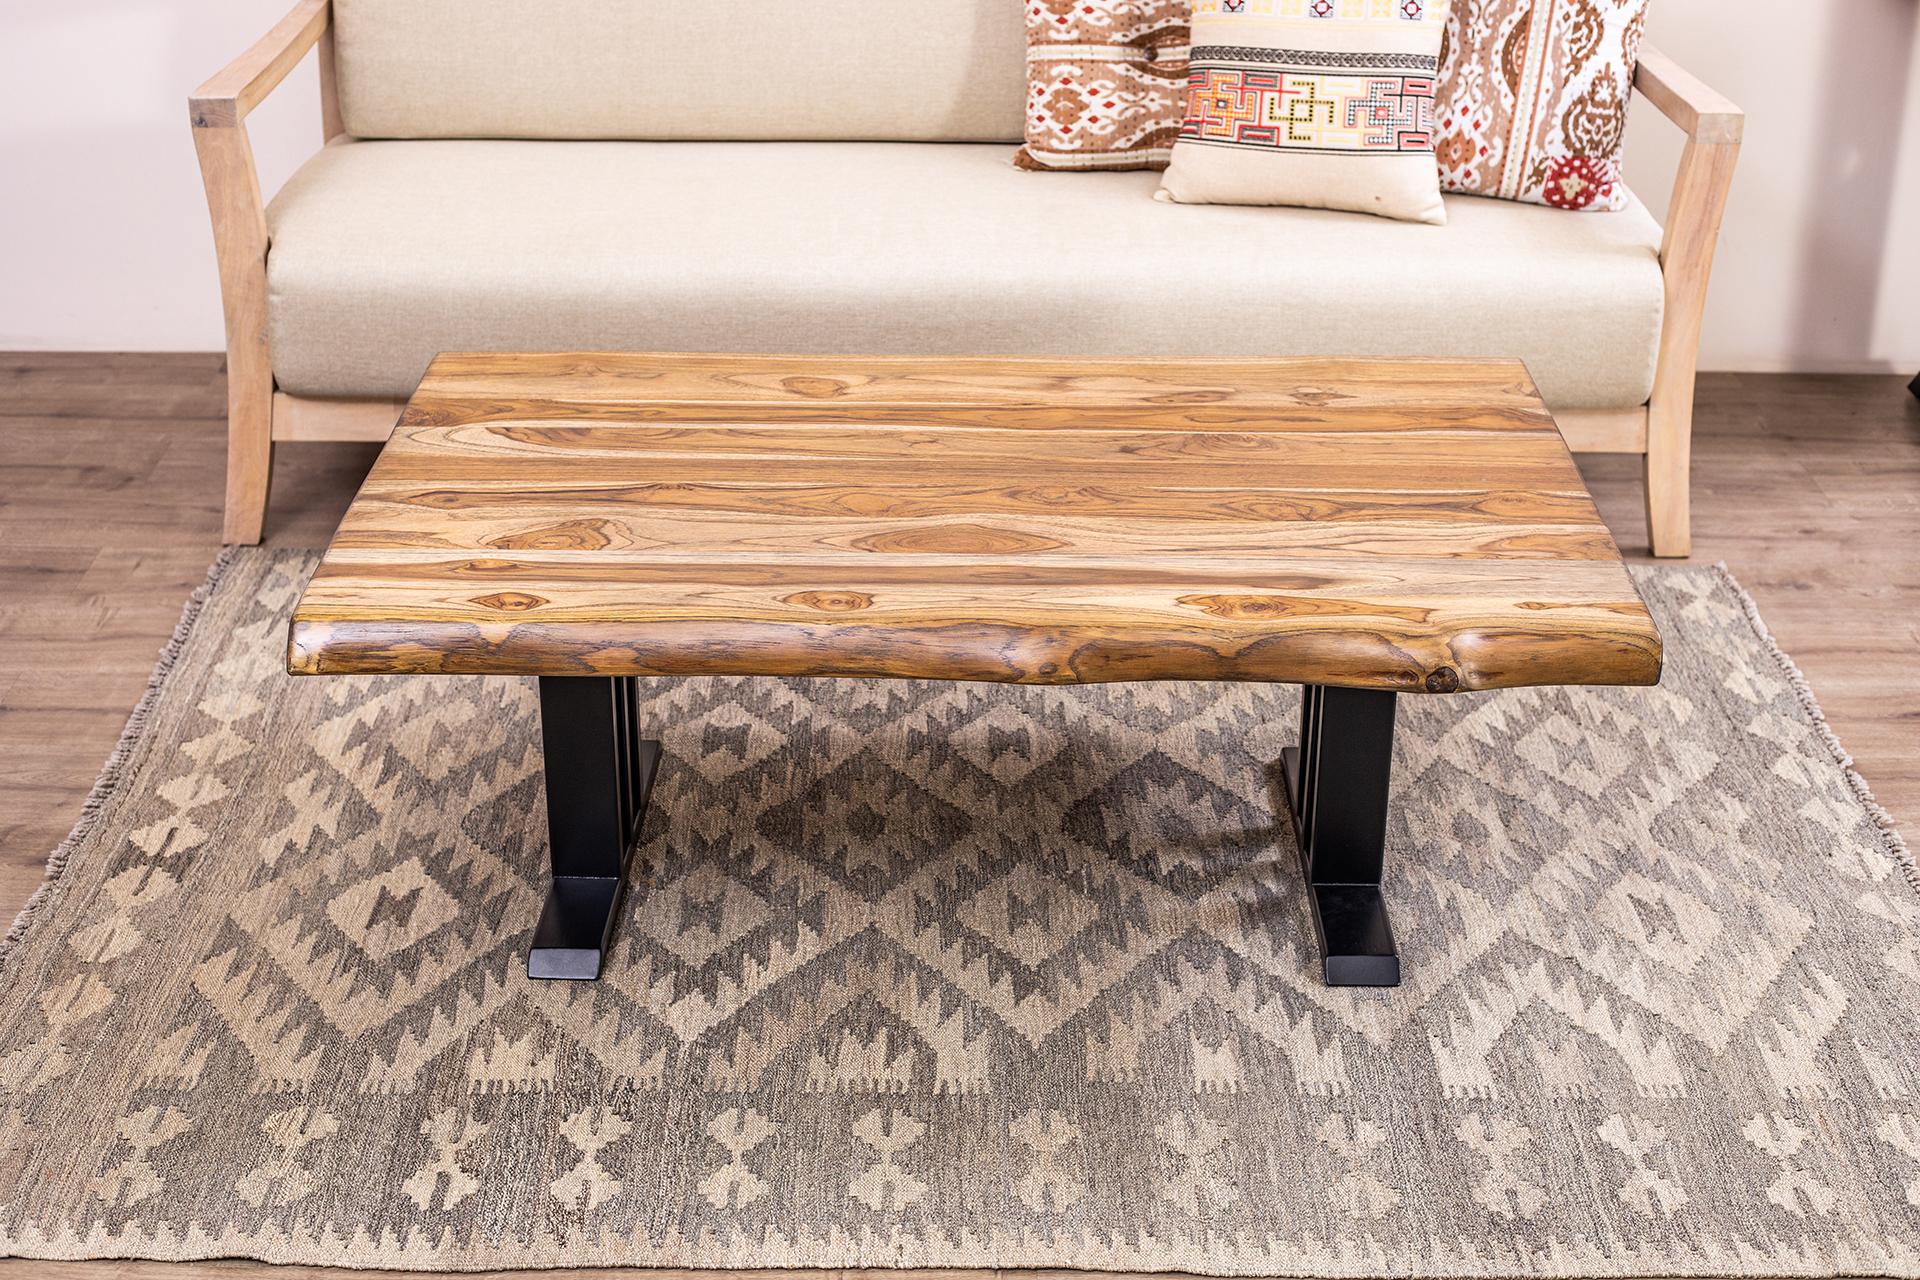 Handcrafted Solid Teak Live Edge Coffee Table with Metal Legs In New Condition For Sale In Boulder, CO